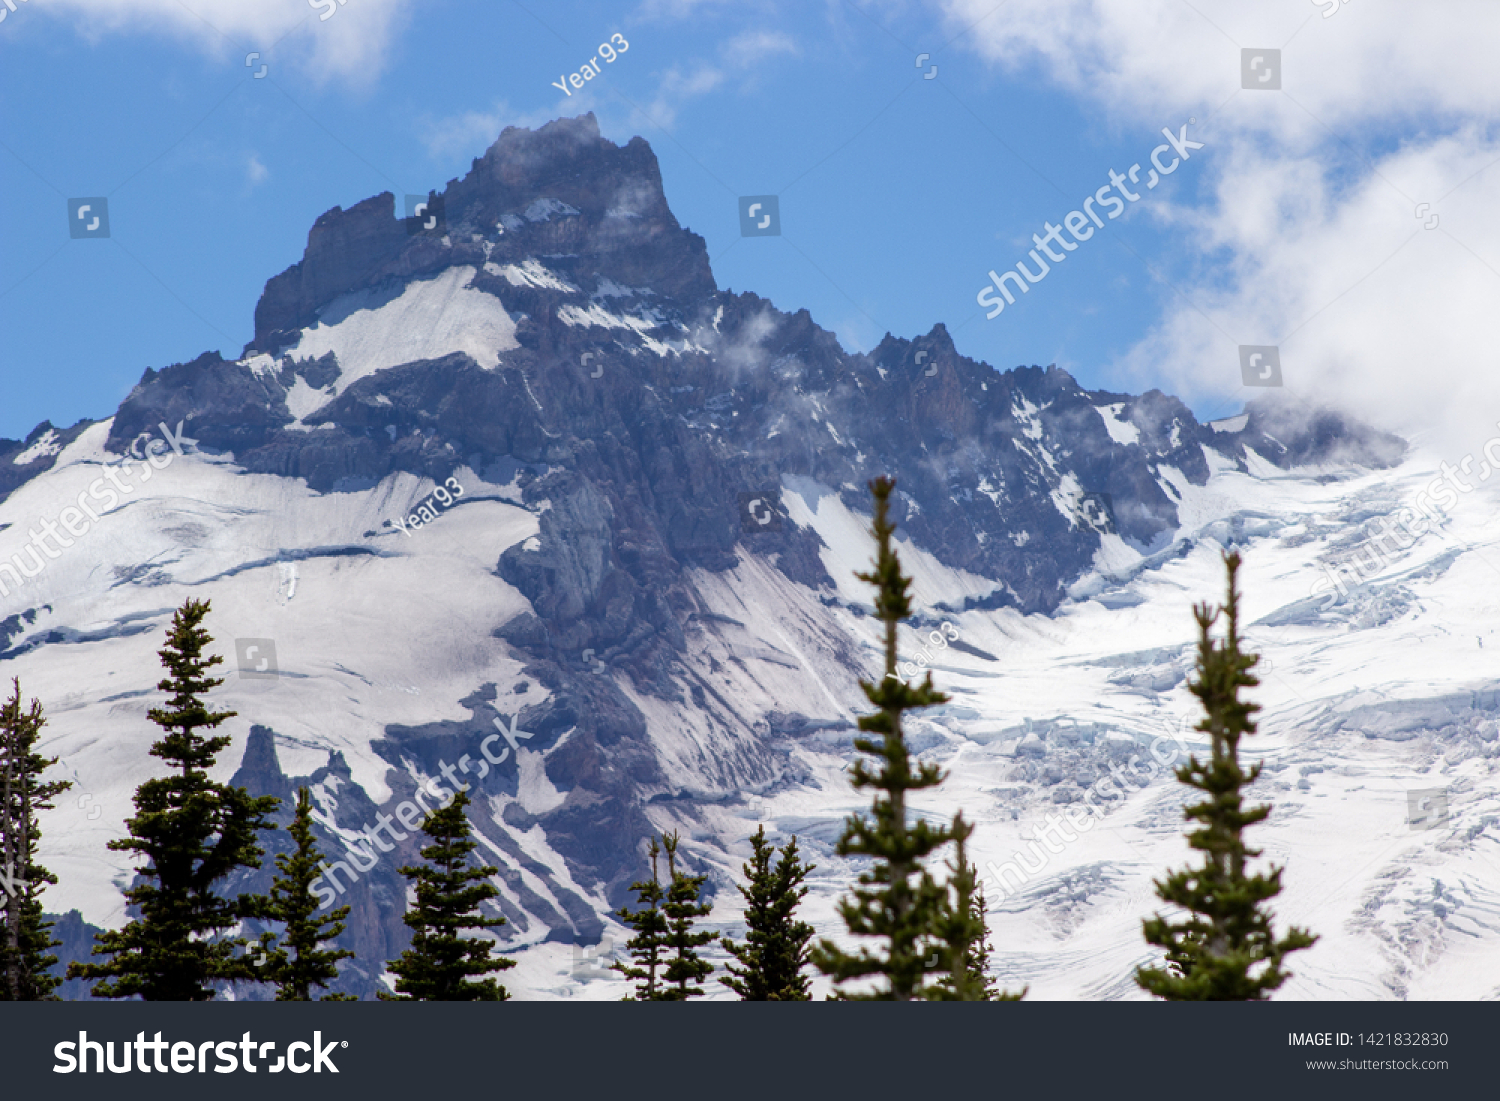 Snowy evergreens & mountain tops. Take a look at these beautiful shots of Washington States Mount Rainier. #1421832830